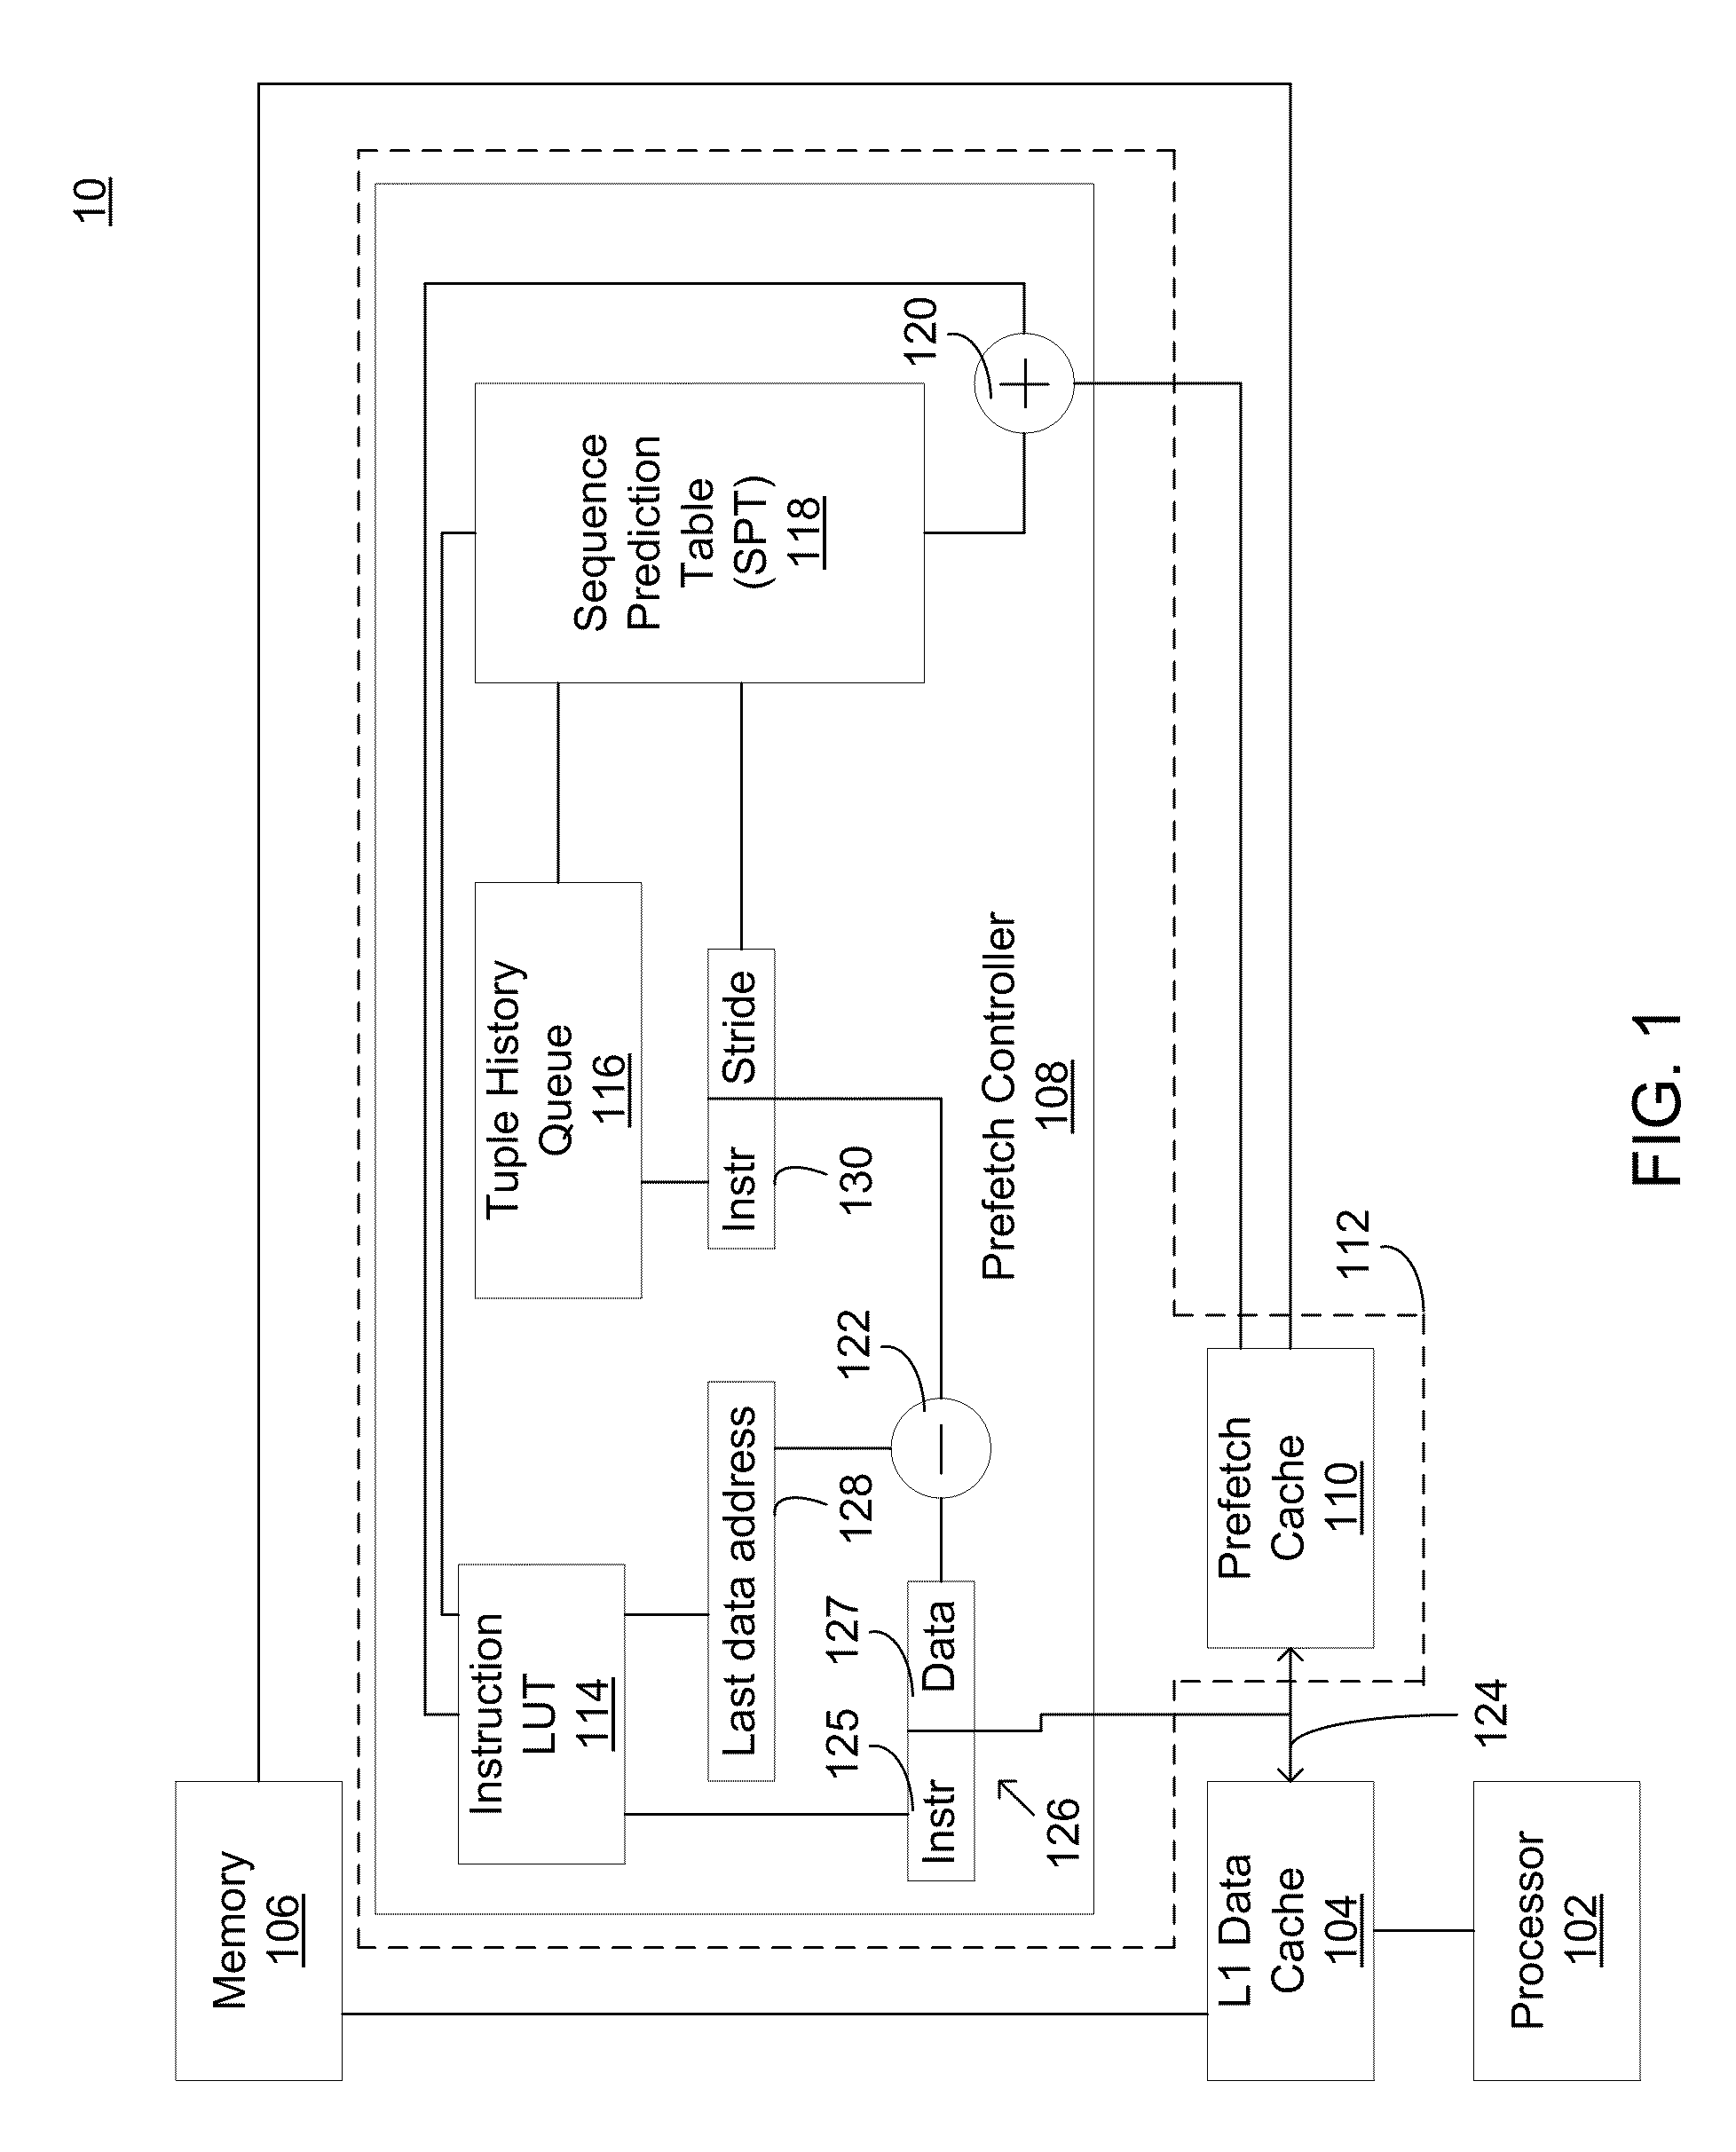 System and method for prefetching data